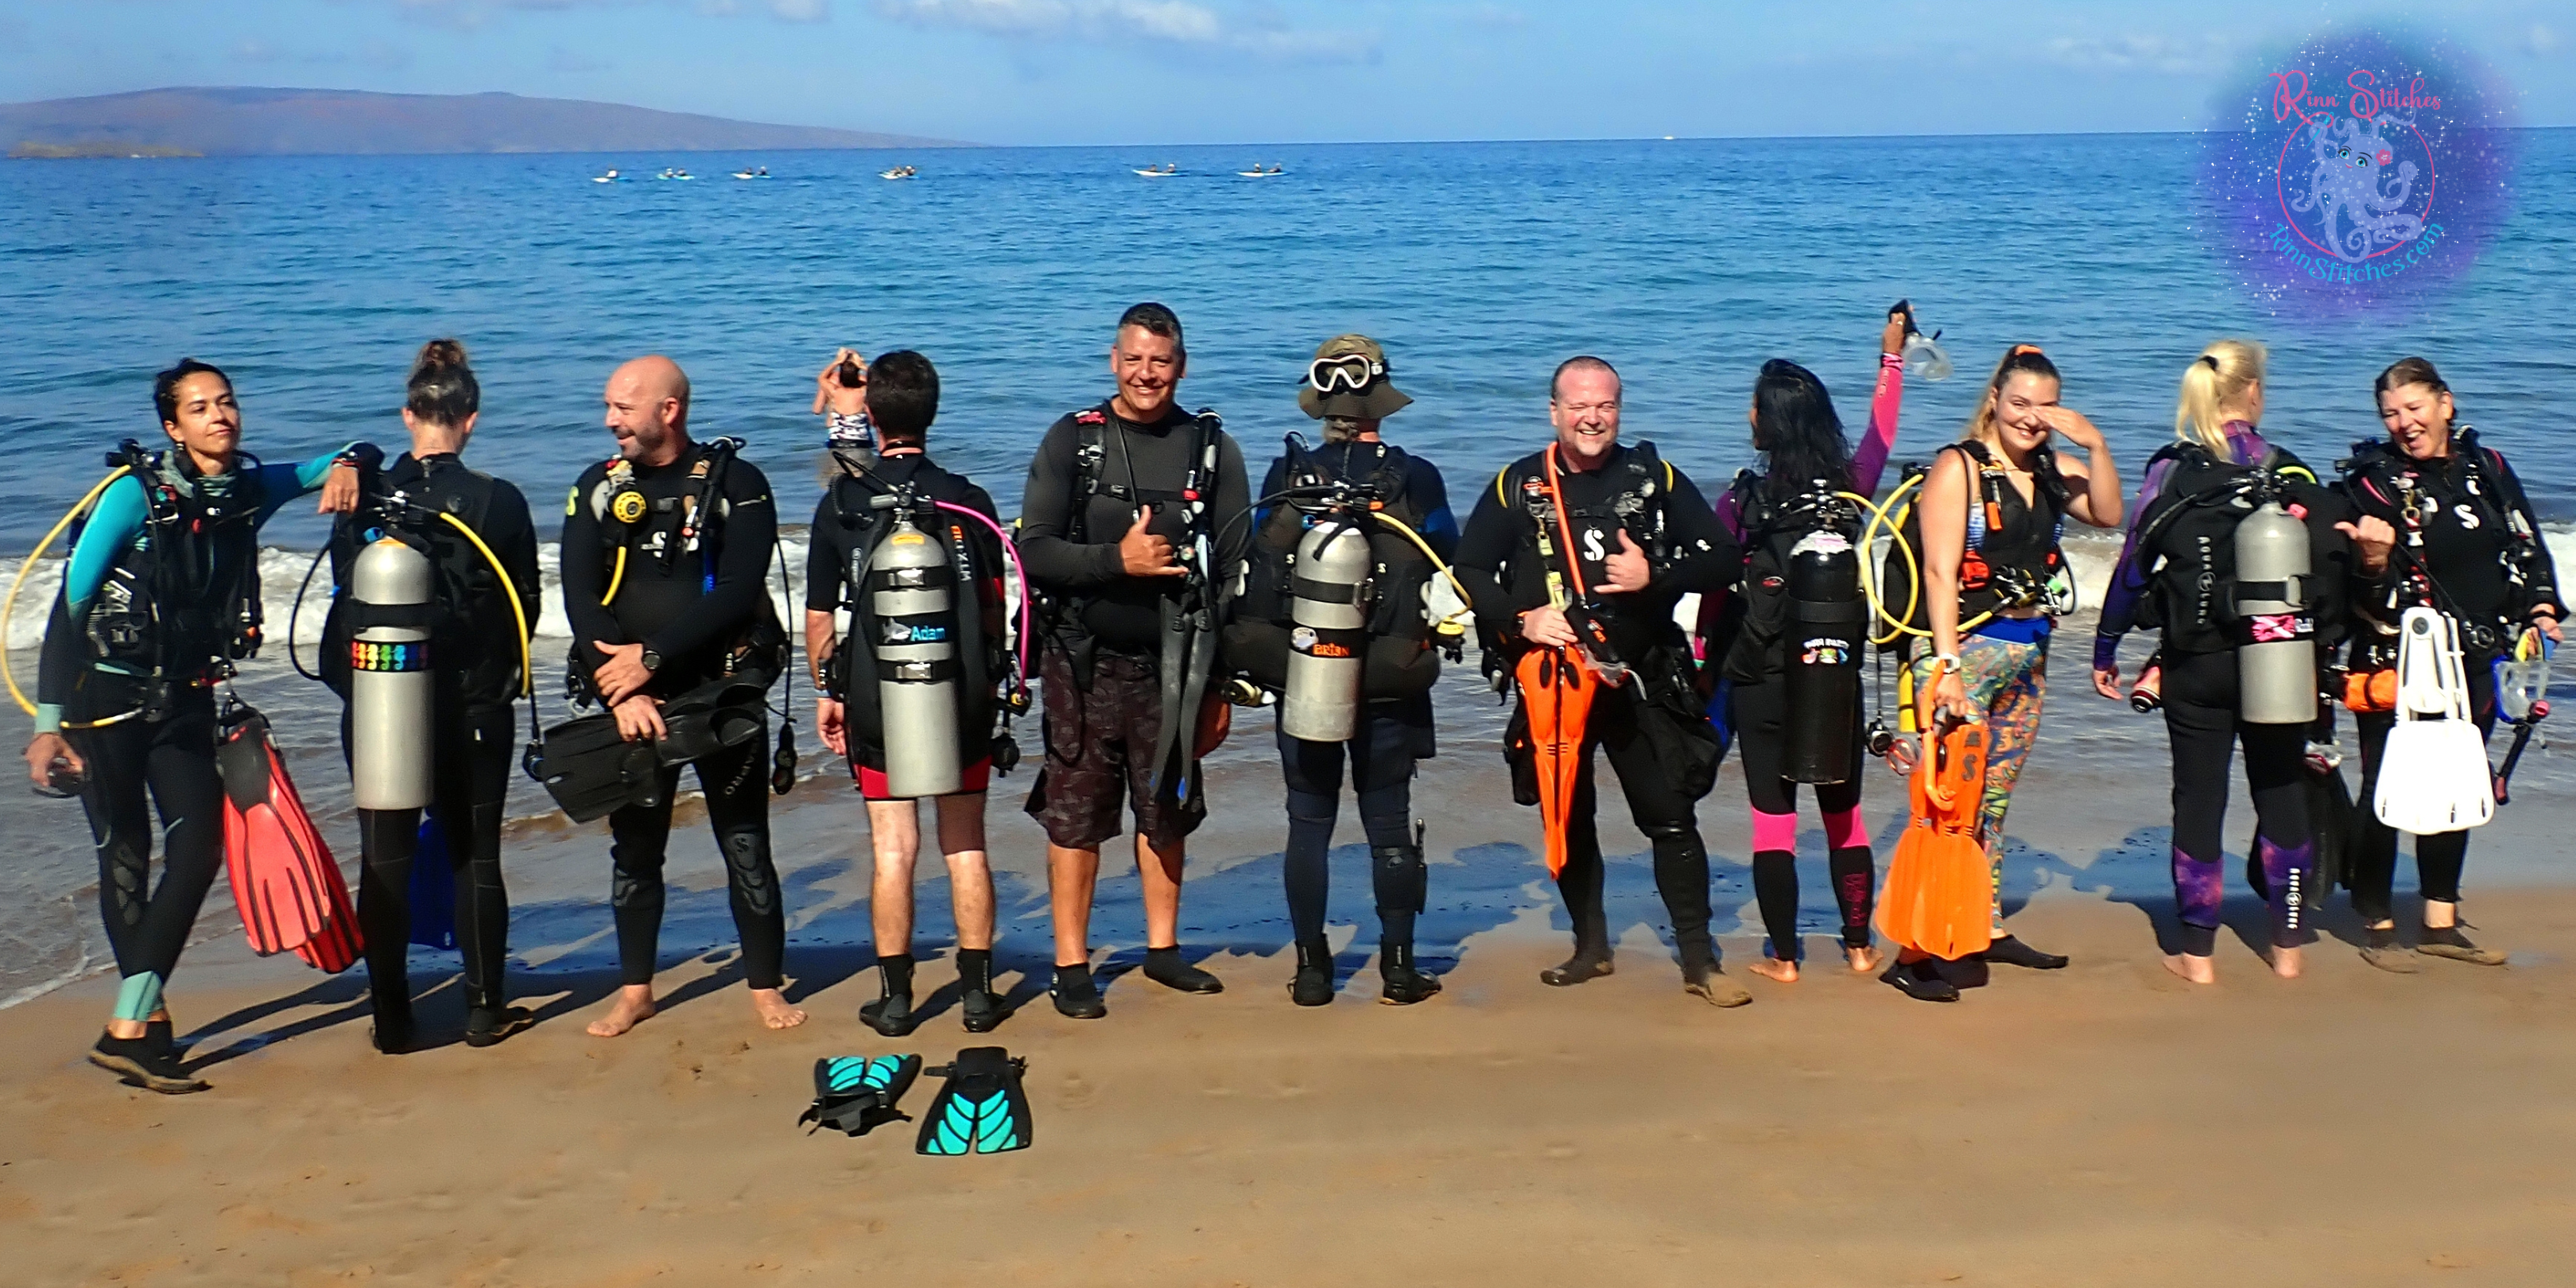 Divers on Ulua beach in Maui, Hawaii with Rinn Stitches Tank Bands & BCD Tags ready to go diving!